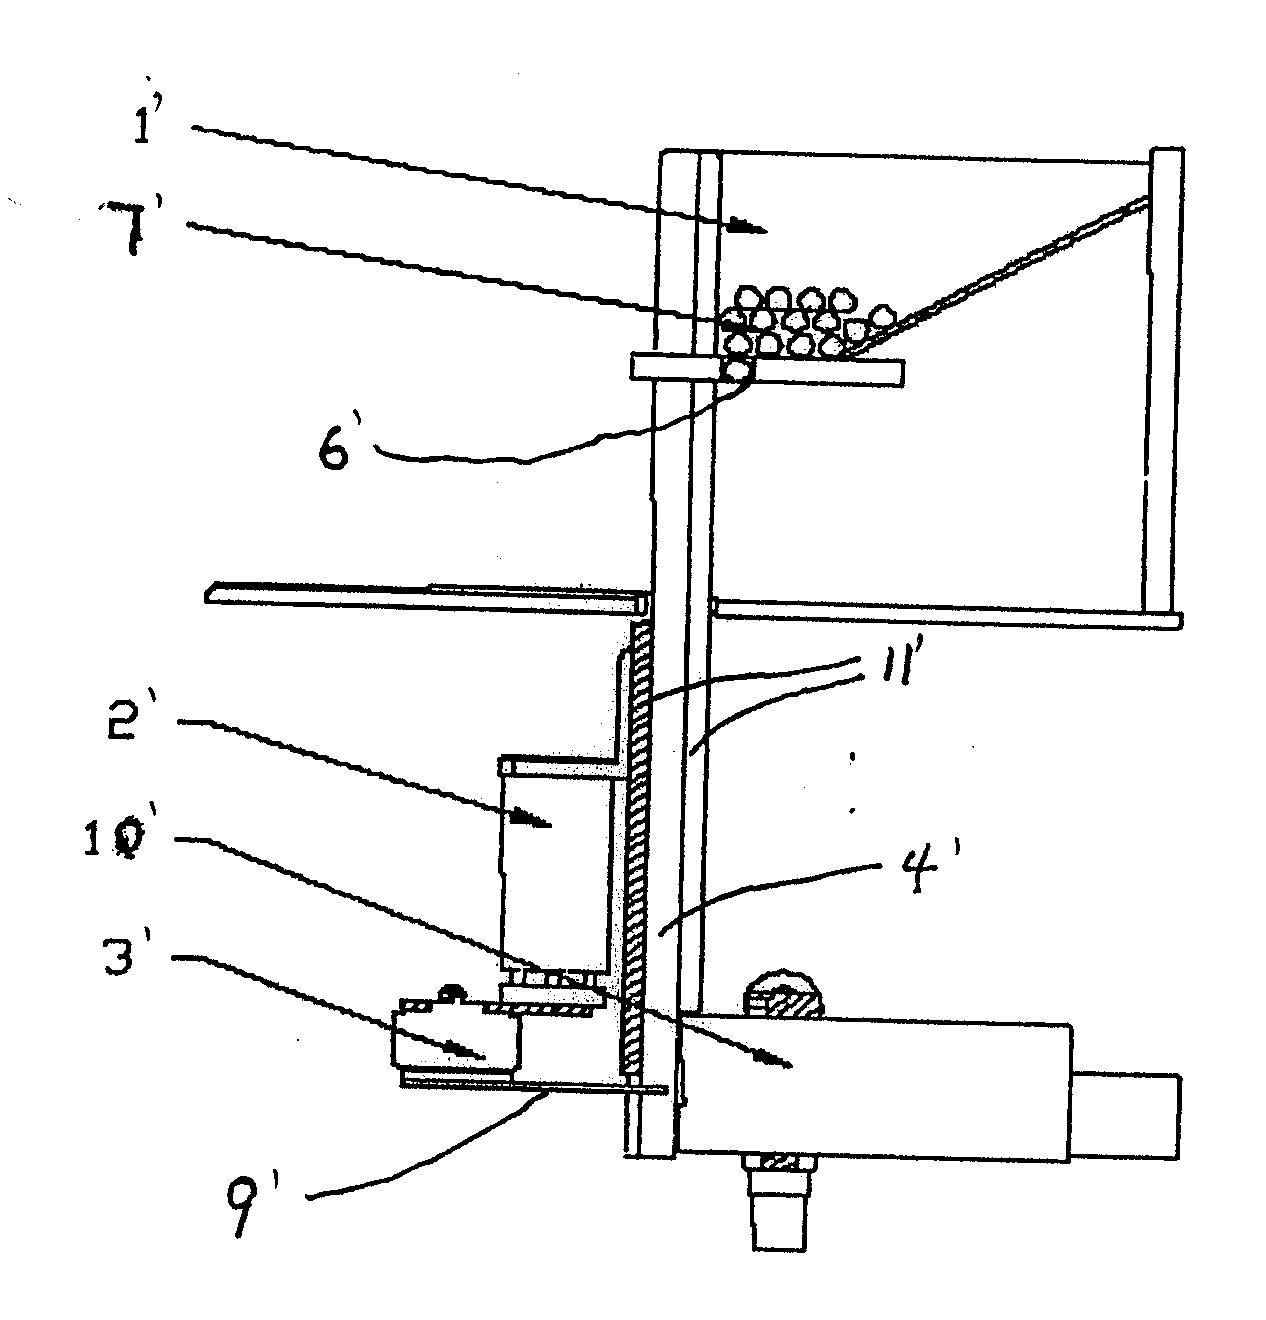 Automatic blanking and code-printing device for multiple cigarette sample inspection items